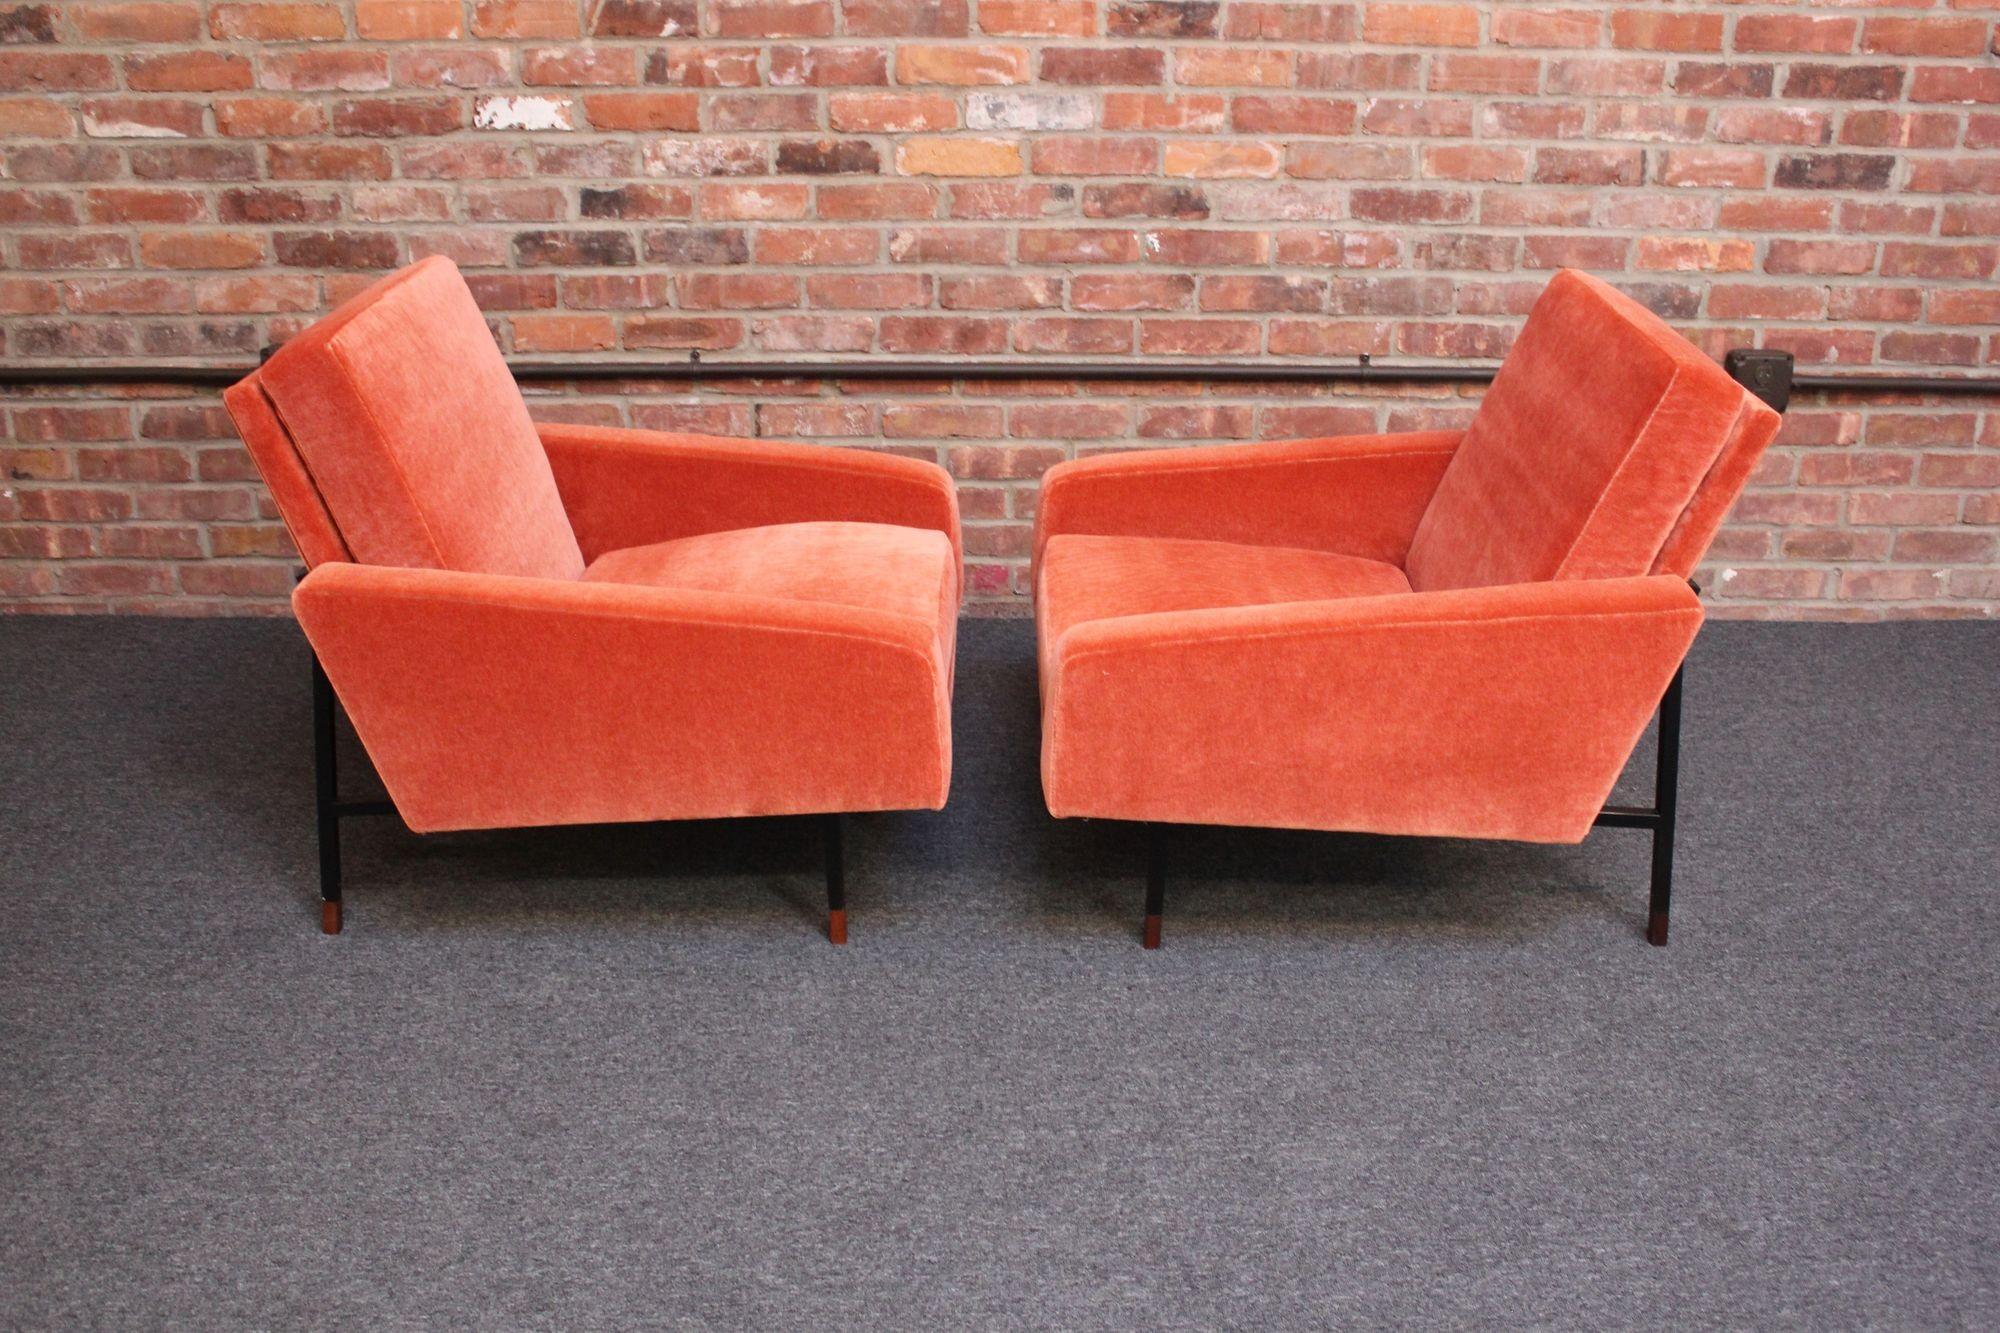 Pair of Italian Modernist Metal and Mohair Lounge Chairs by Campo and Graffi For Sale 10